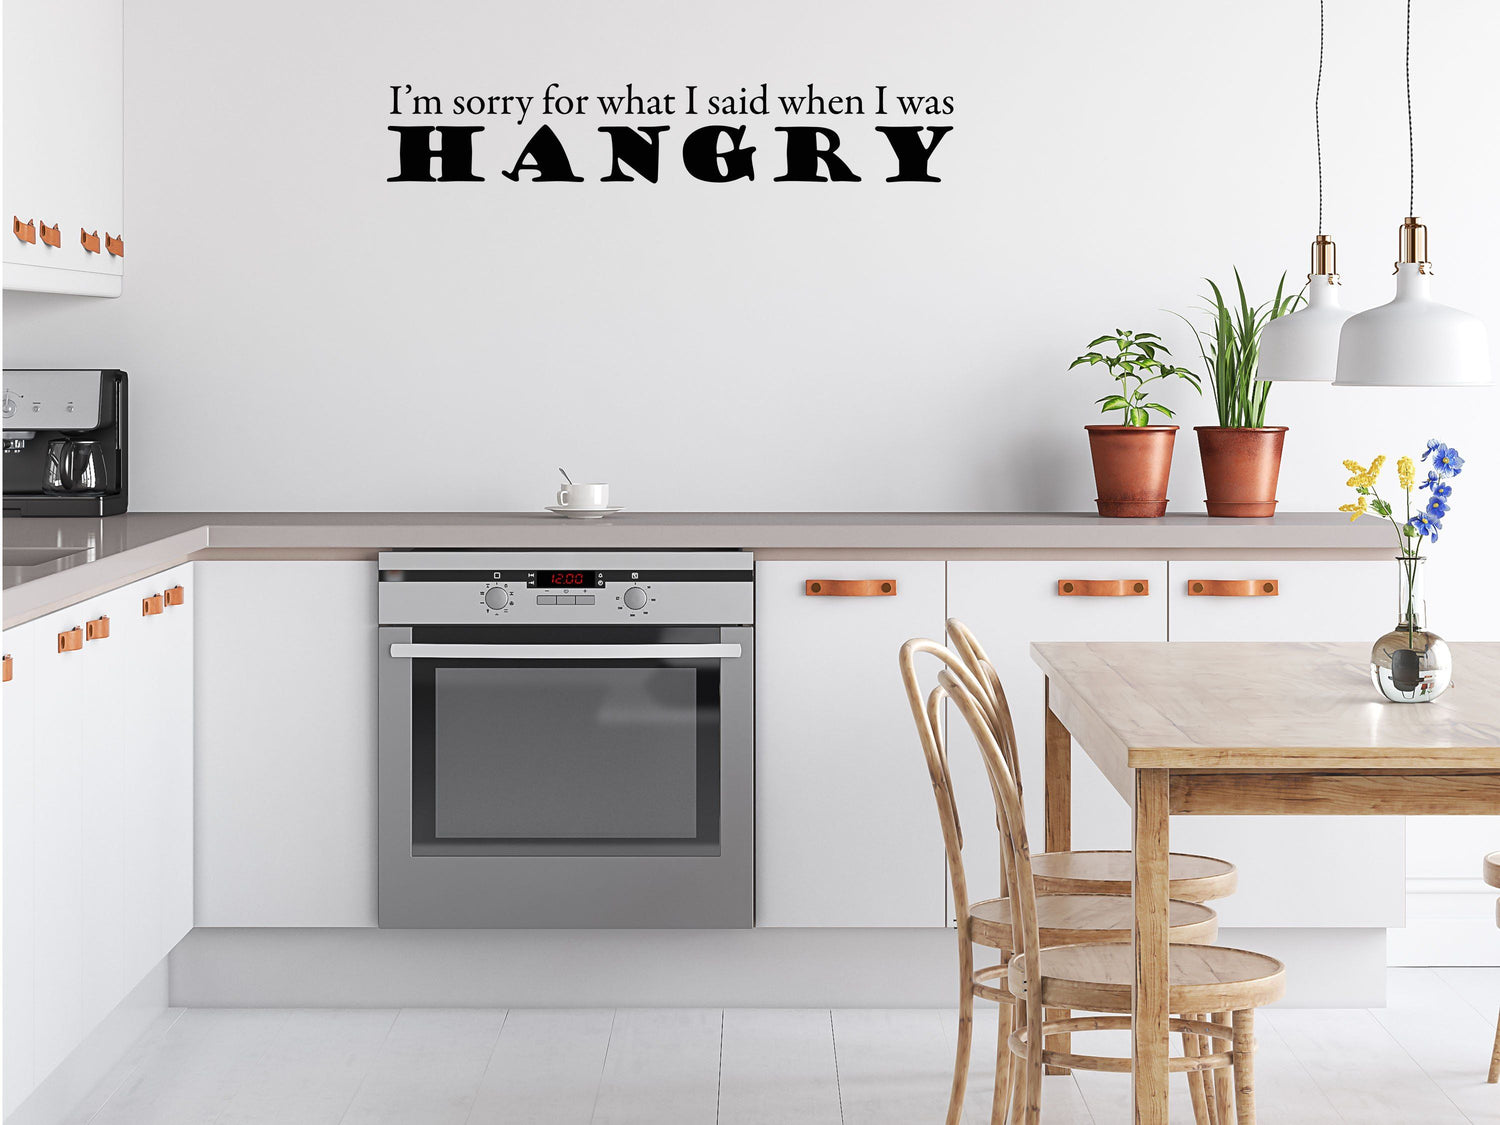 I'm Sorry For What I Said When I Was Hangry - Inspirational Wall Decals Vinyl Wall Decal Inspirational Wall Signs 